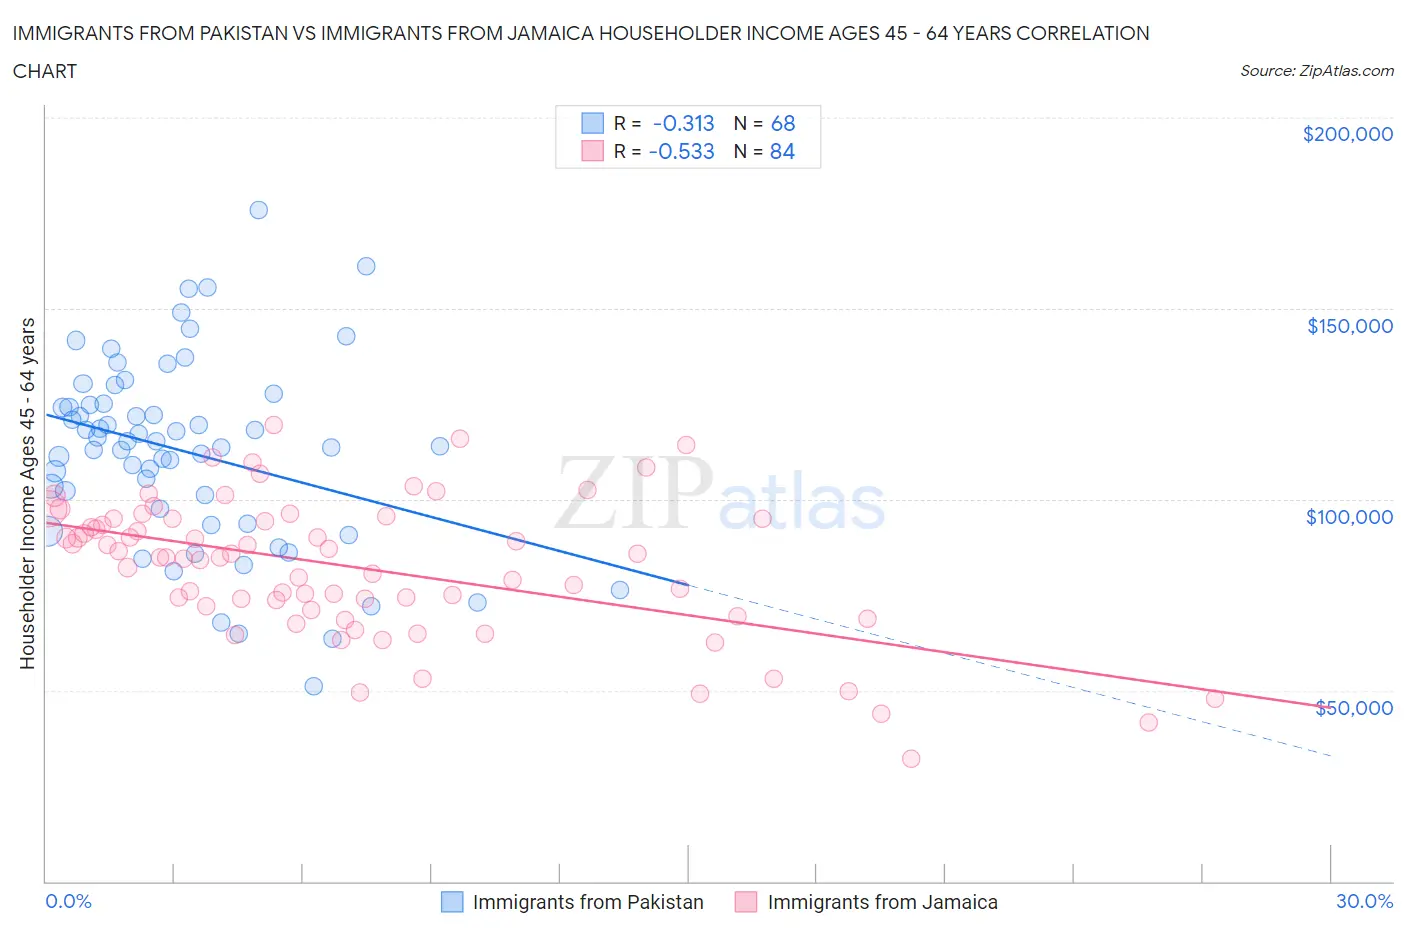 Immigrants from Pakistan vs Immigrants from Jamaica Householder Income Ages 45 - 64 years